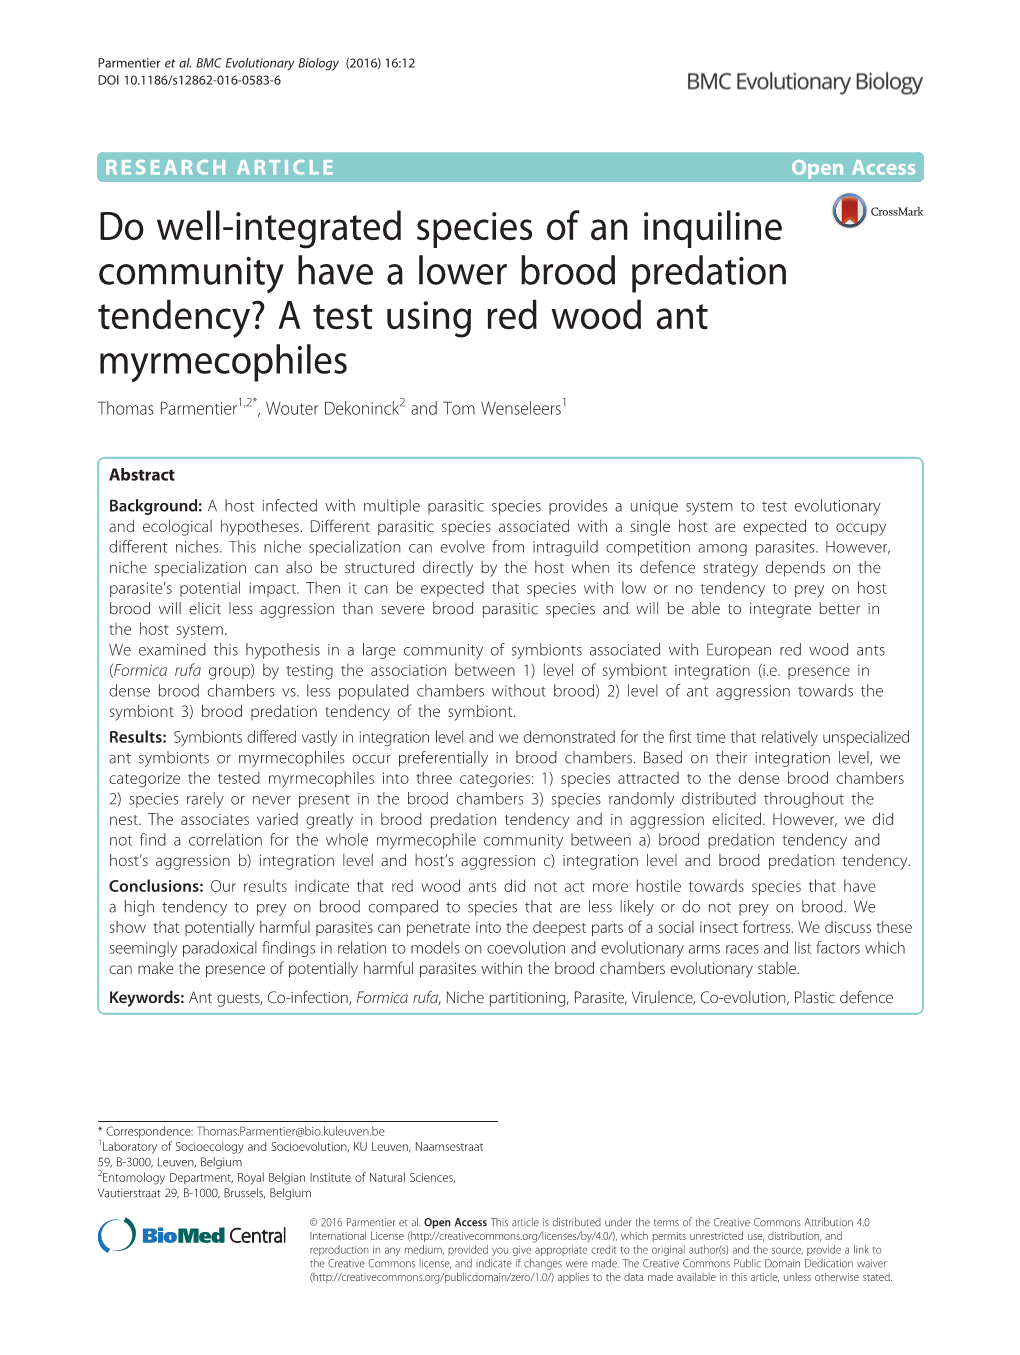 Do Well-Integrated Species of an Inquiline Community Have a Lower Brood Predation Tendency? a Test Using Red Wood Ant Myrmecophi